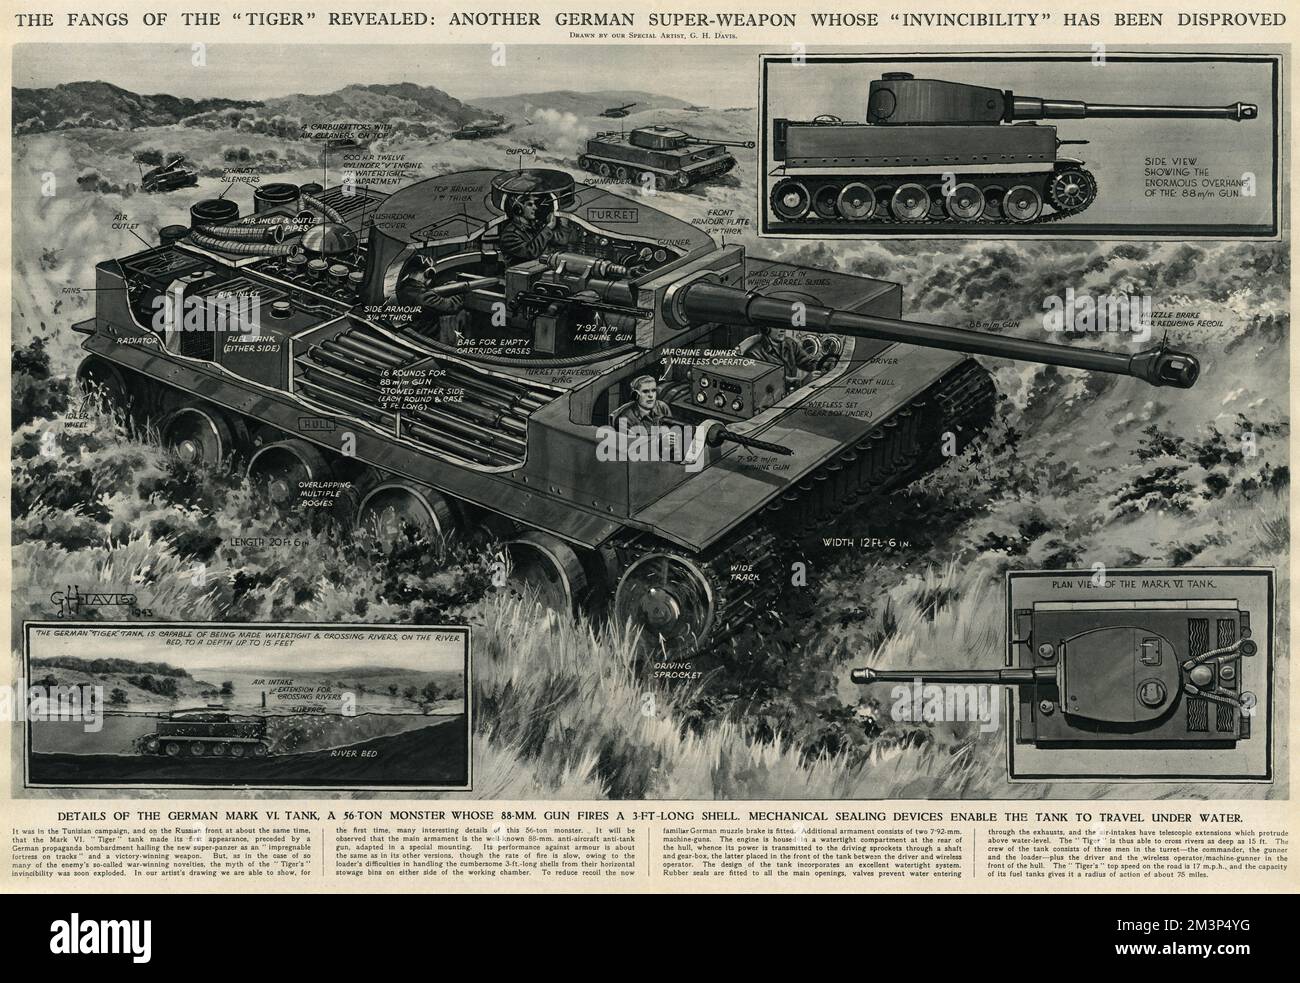 The fangs of the 'Tiger' revealed: another German super-weapon whose 'invincibility' has been disproved.  Details of the German Mark VI tank, a 56-ton monster whose 88mm gun fires a three foot long shell.  Mechanical sealing devices enable the tank to travel under water.      Date: 1943 Stock Photo